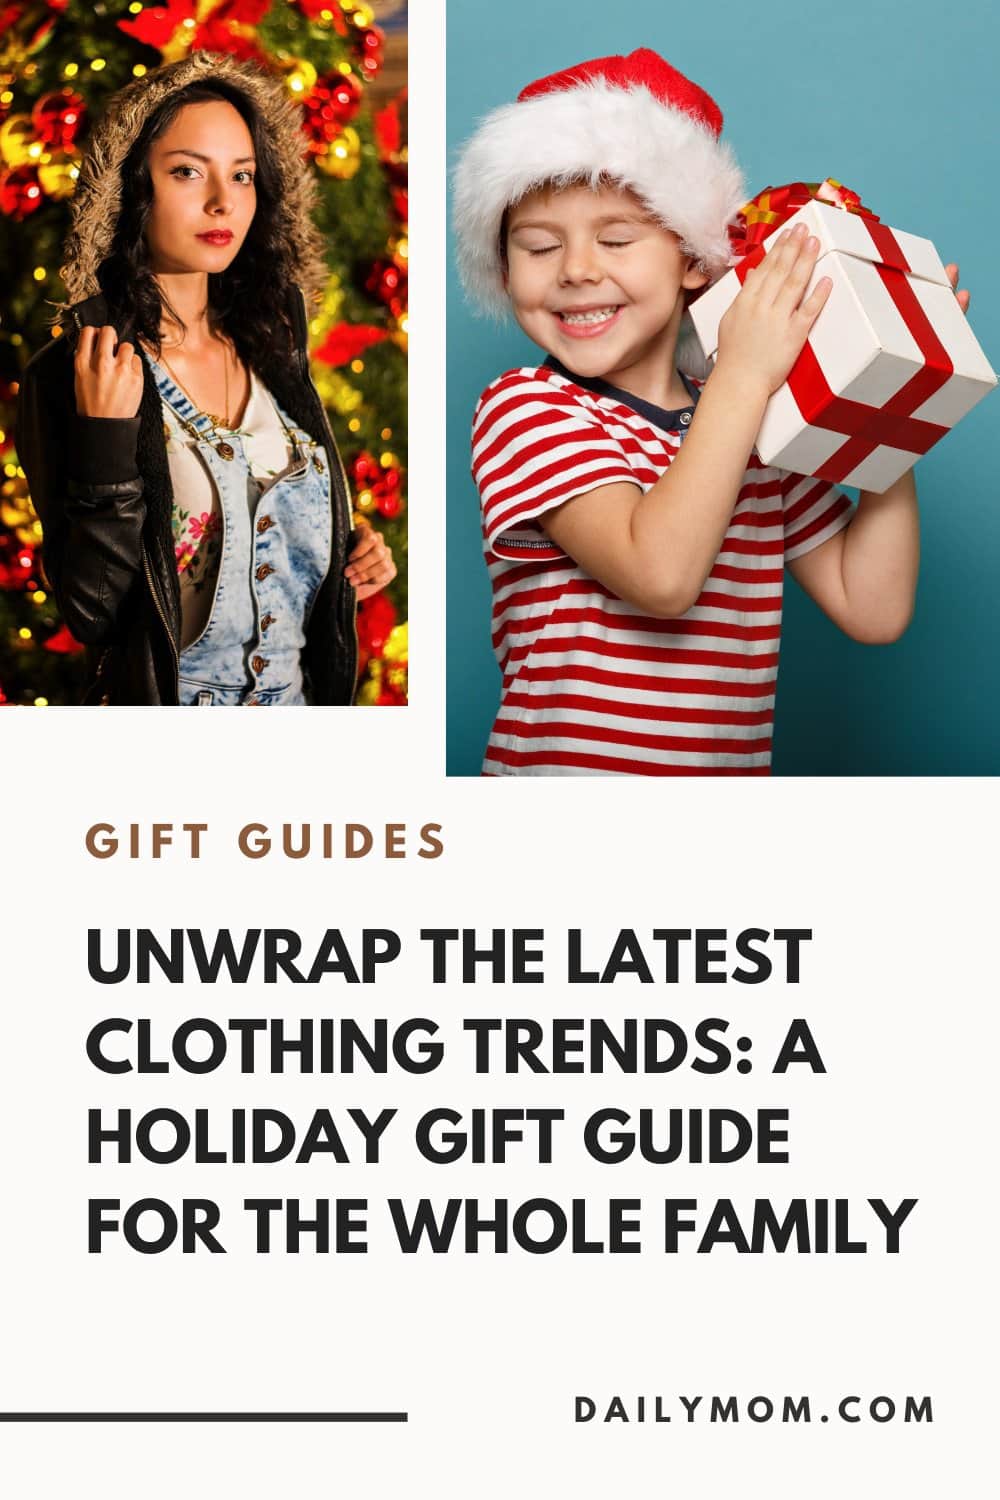 Latest Clothing Trends: A Fashion Holiday Gift Guide For The Whole Family 80 Daily Mom, Magazine For Families